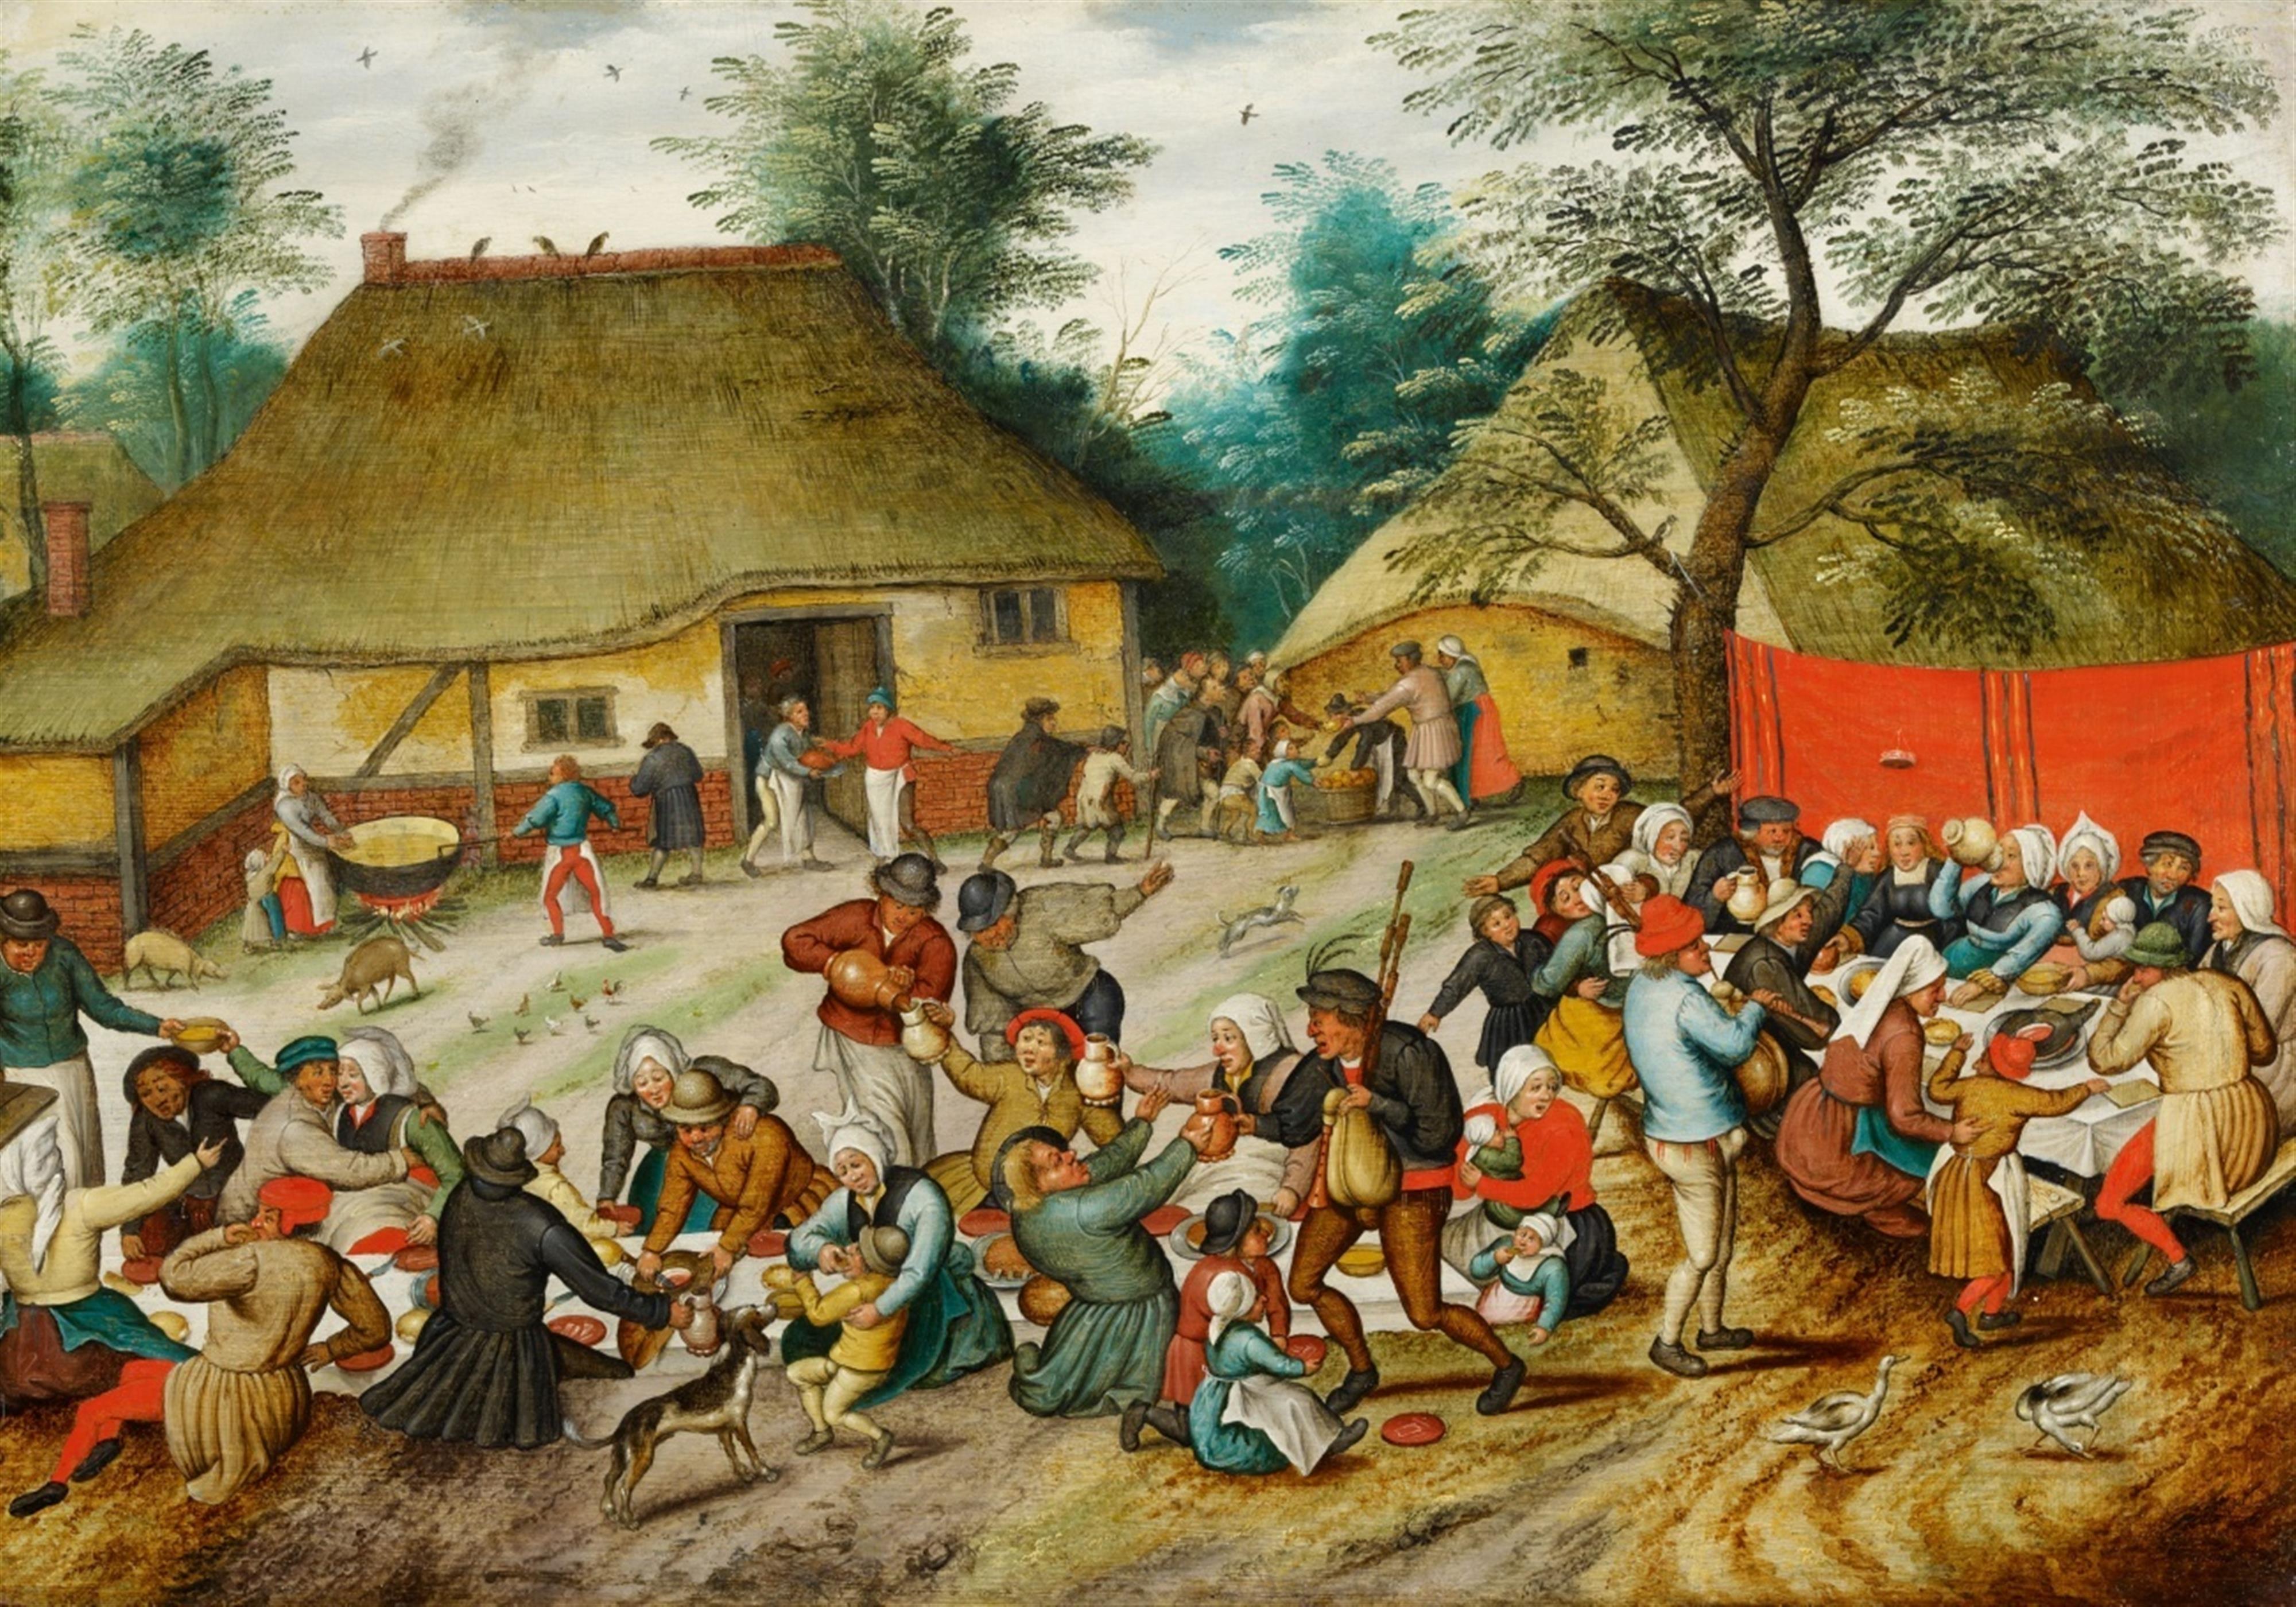 Pieter Brueghel the Younger - The Peasant Wedding Feast - image-1